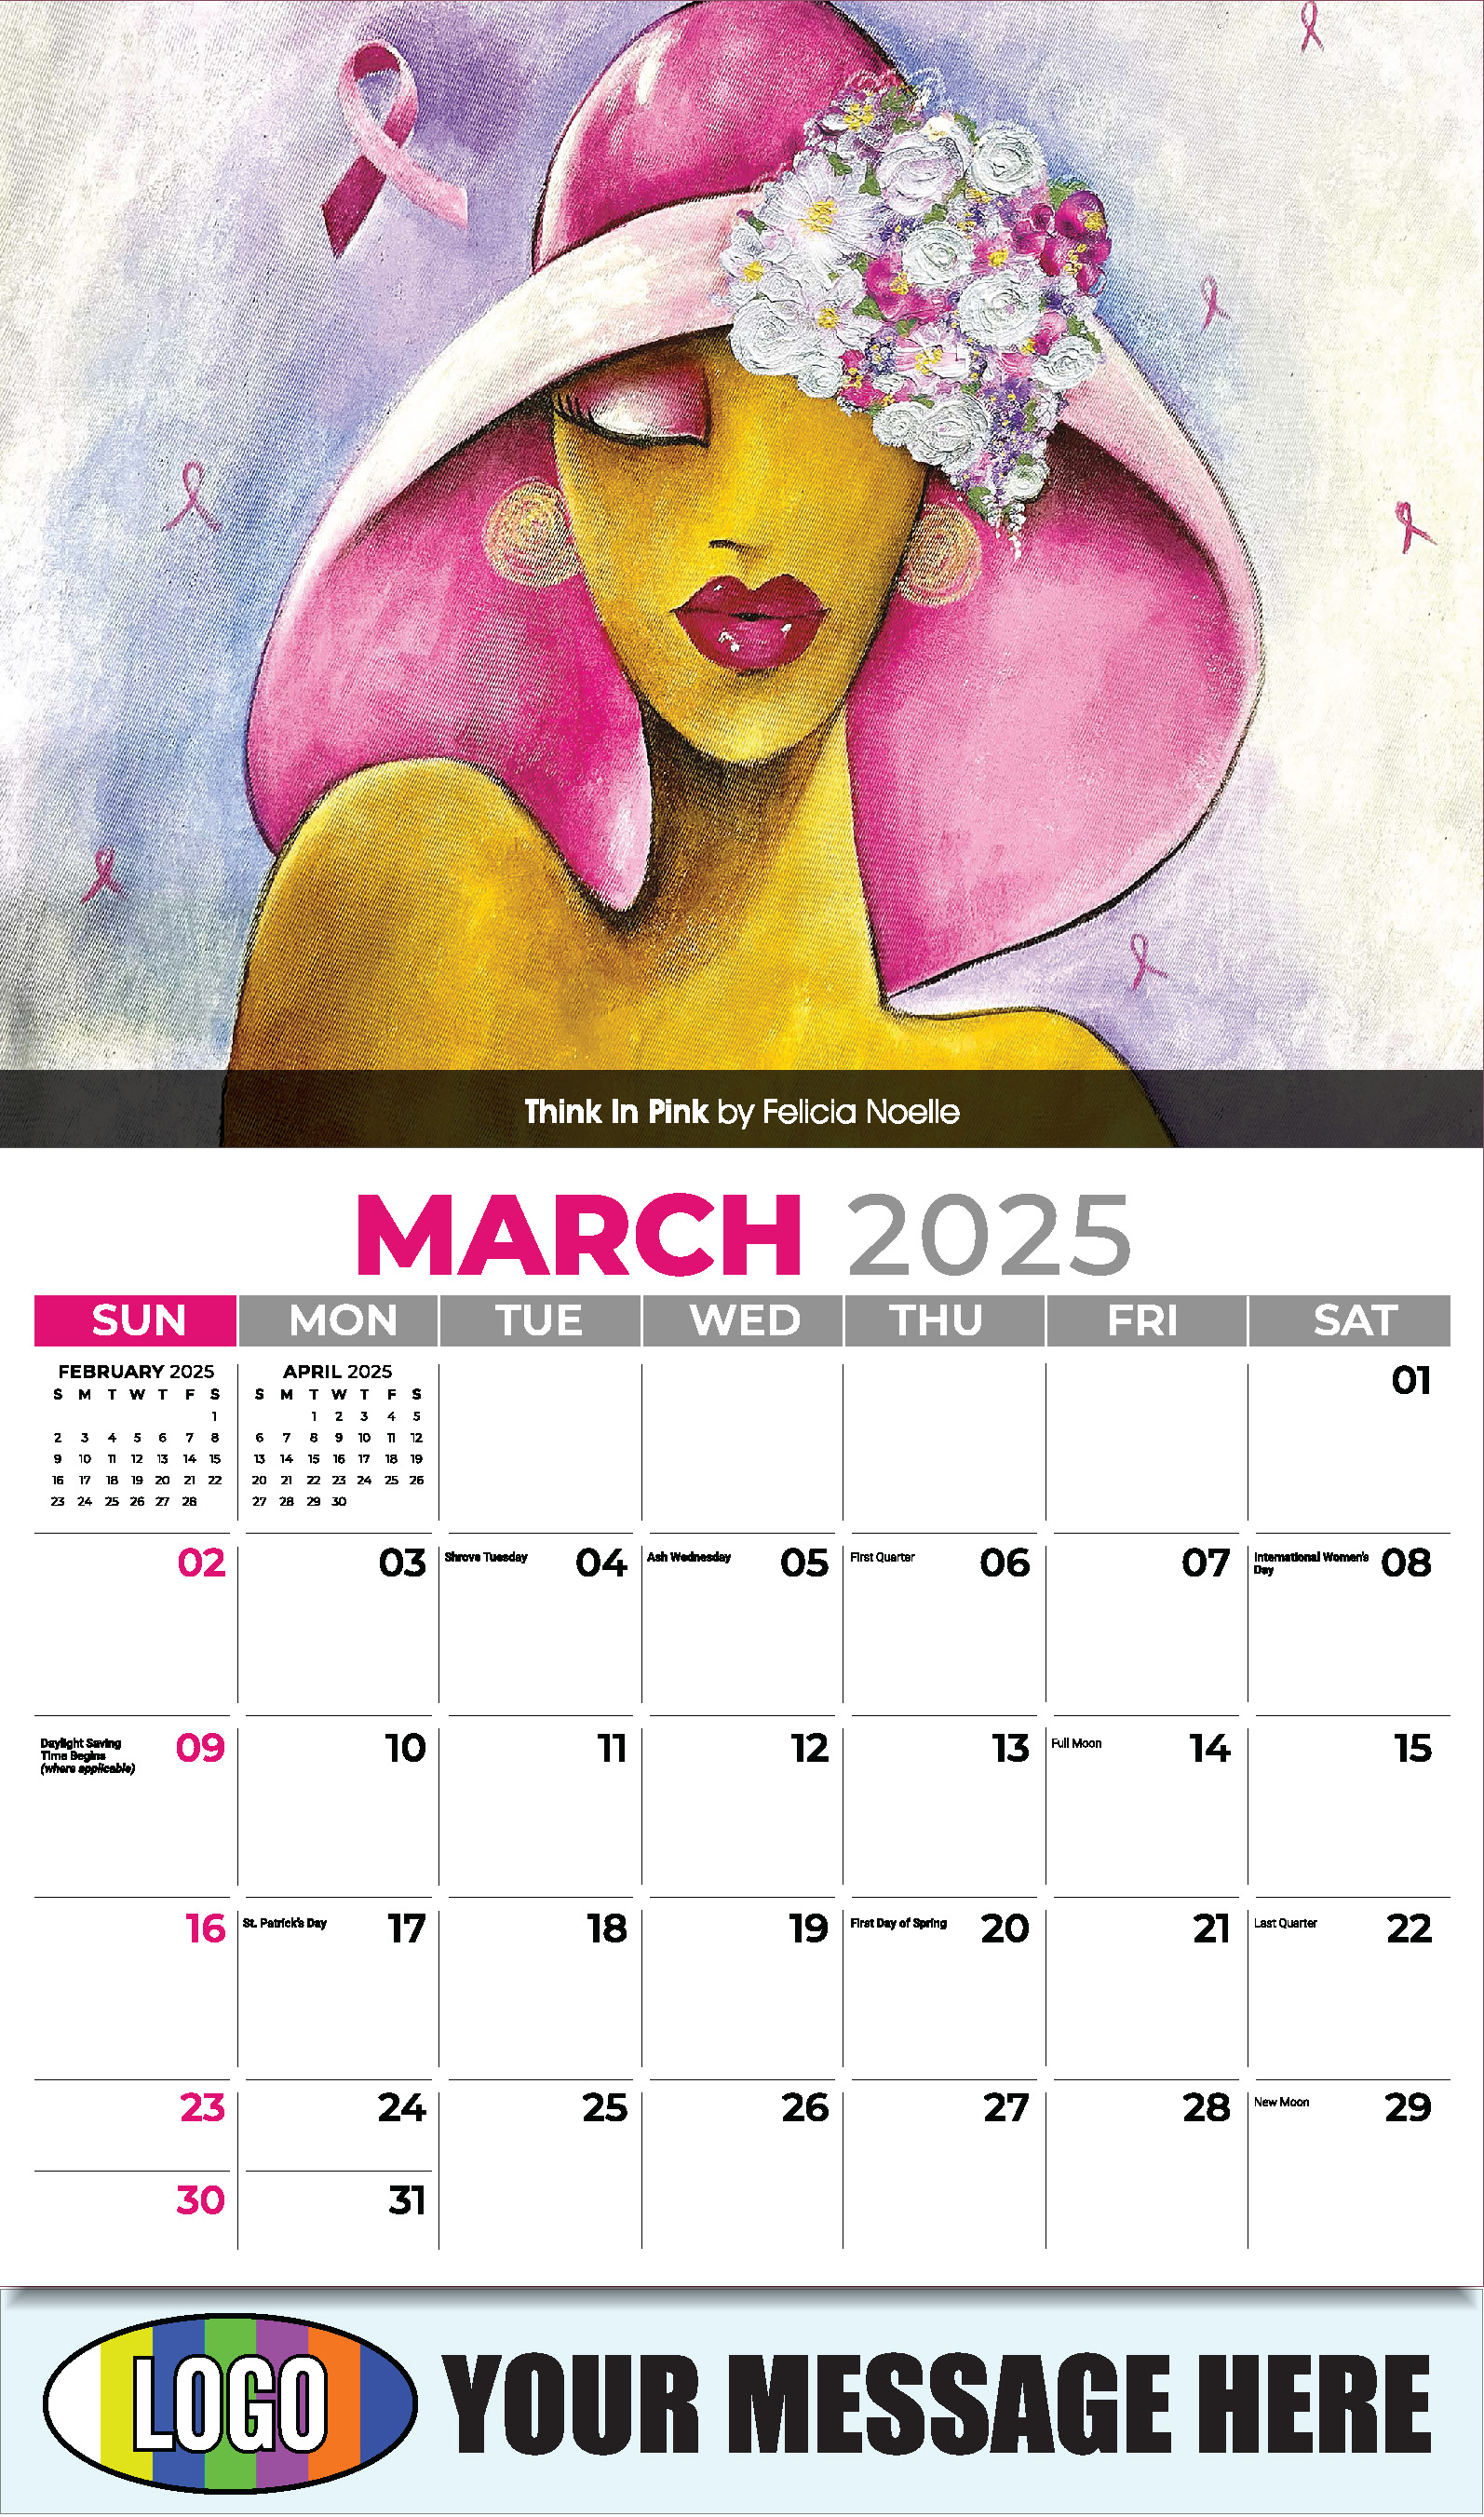 Celebration of African American Art 2025 Business Promotional Calendar - March